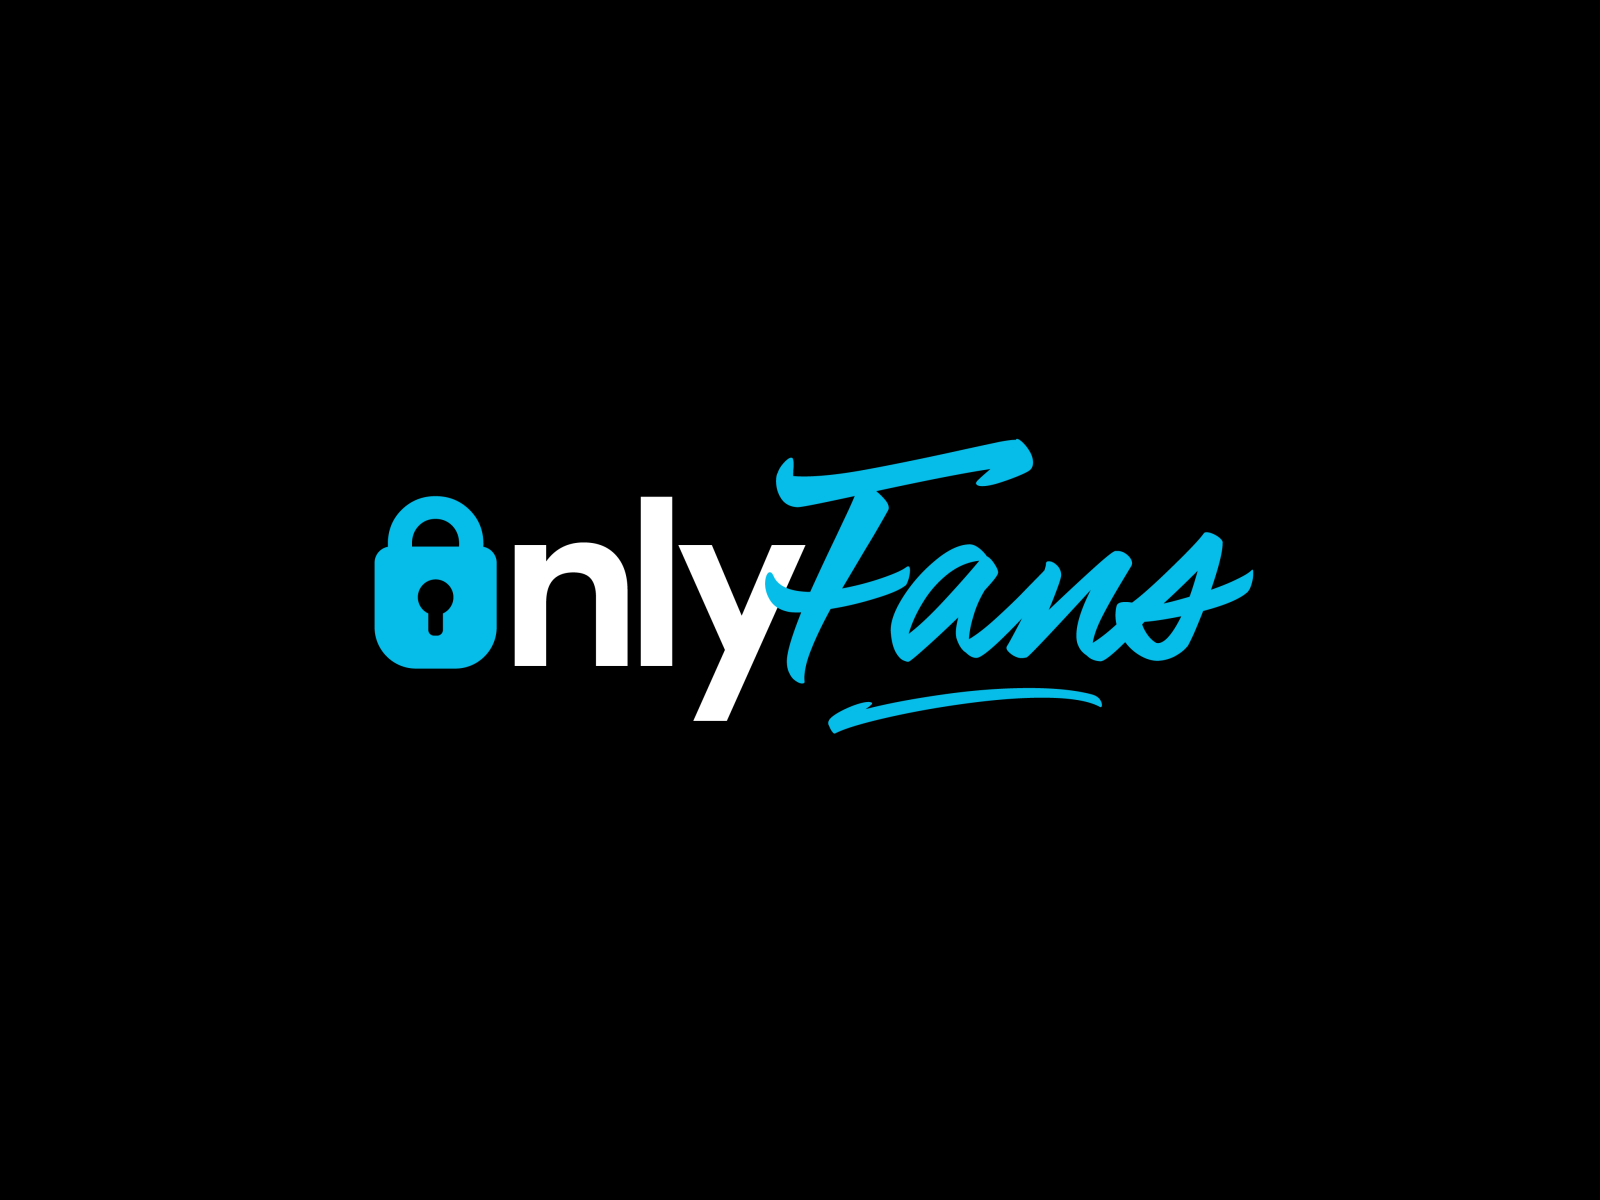 How to get refund from onlyfans